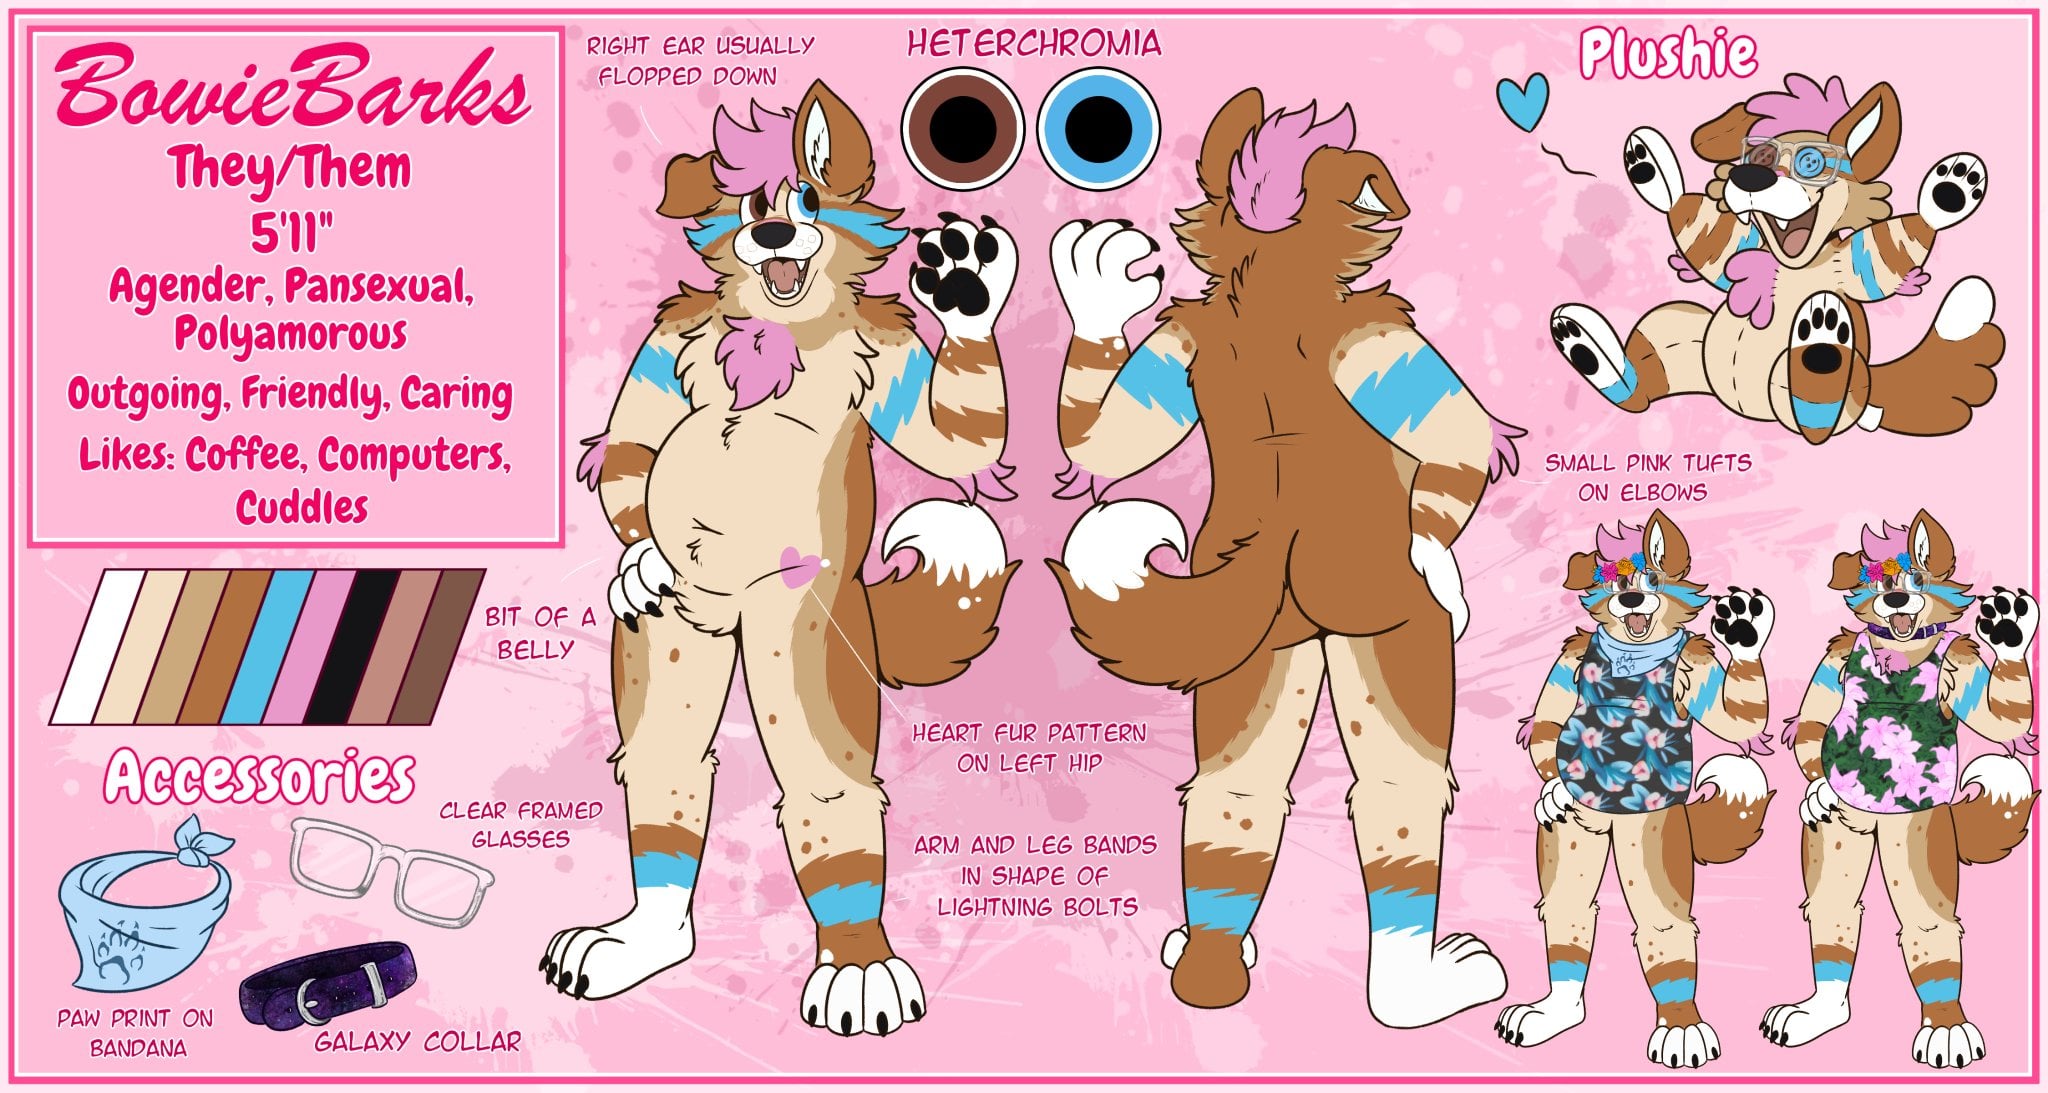 A ref sheet of Bowie showing front and back, two alts with flower tank tops on, and a Plush Bowie by Ron Raccoon